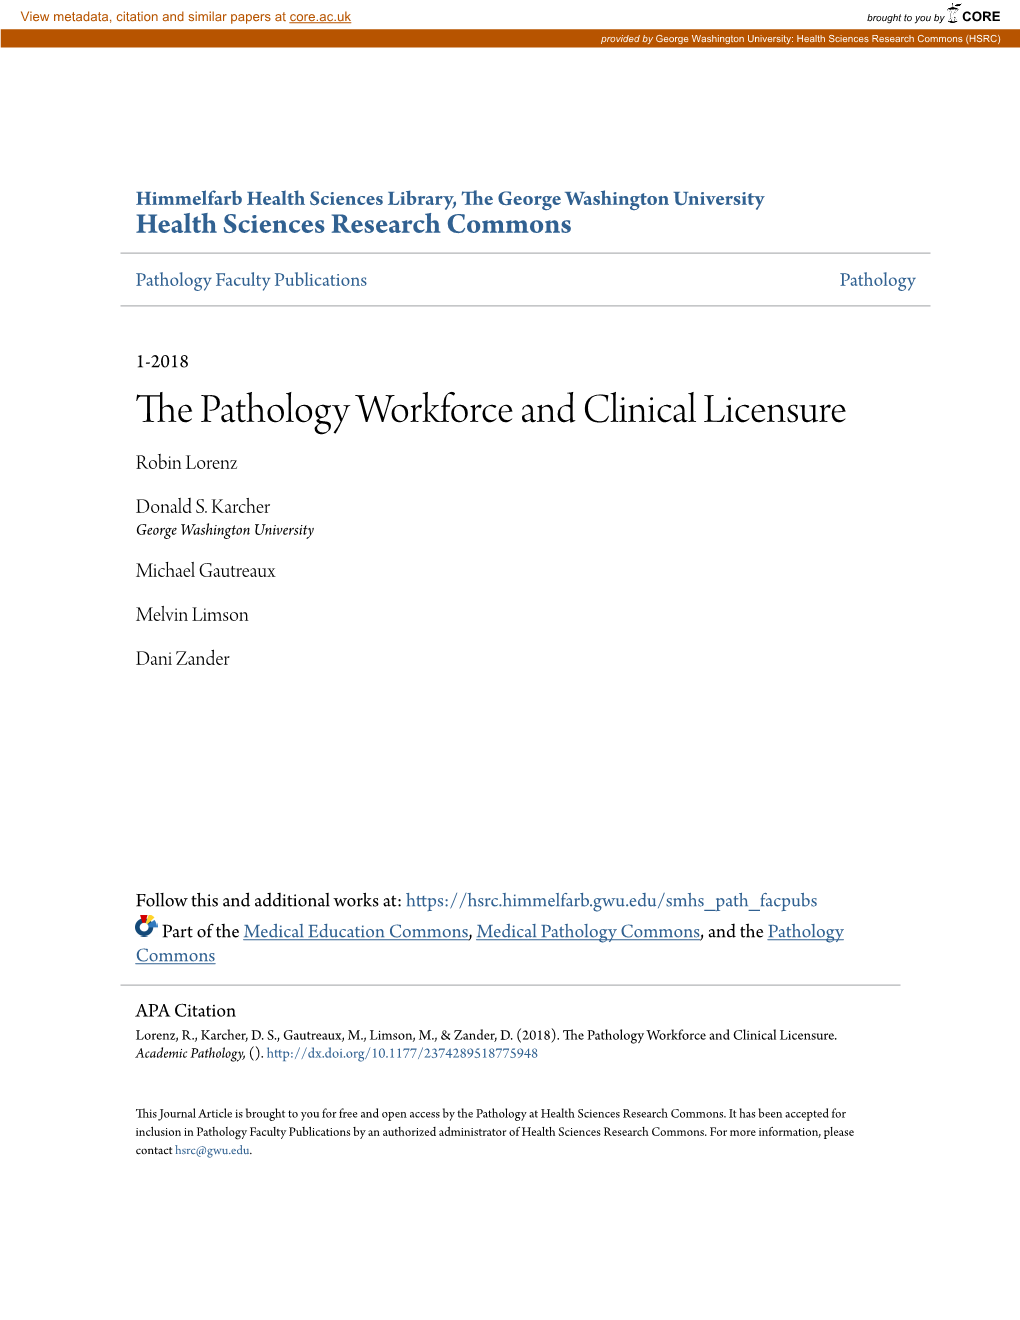 The Pathology Workforce and Clinical Licensure